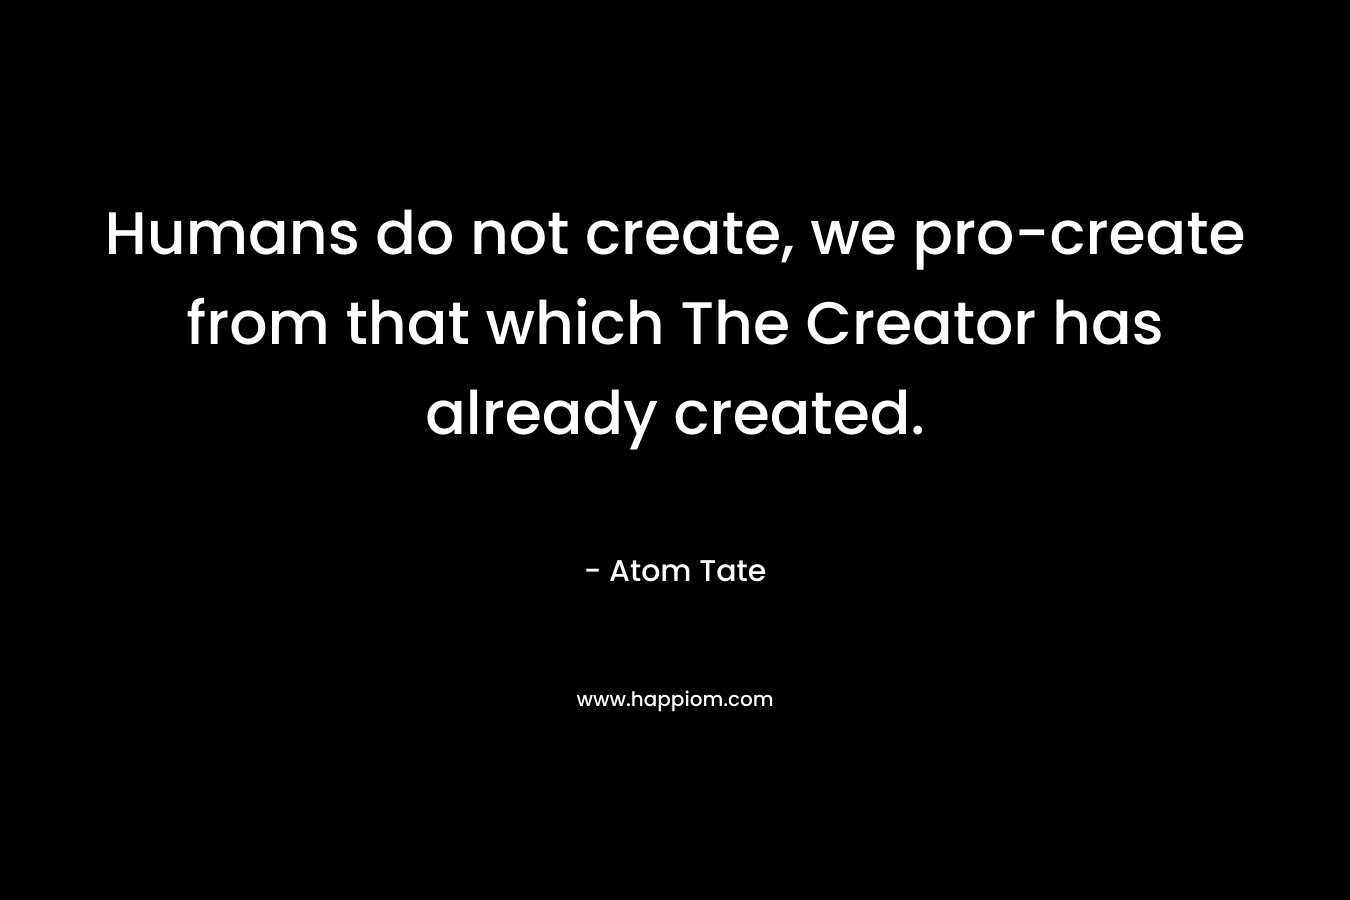 Humans do not create, we pro-create from that which The Creator has already created. – Atom Tate